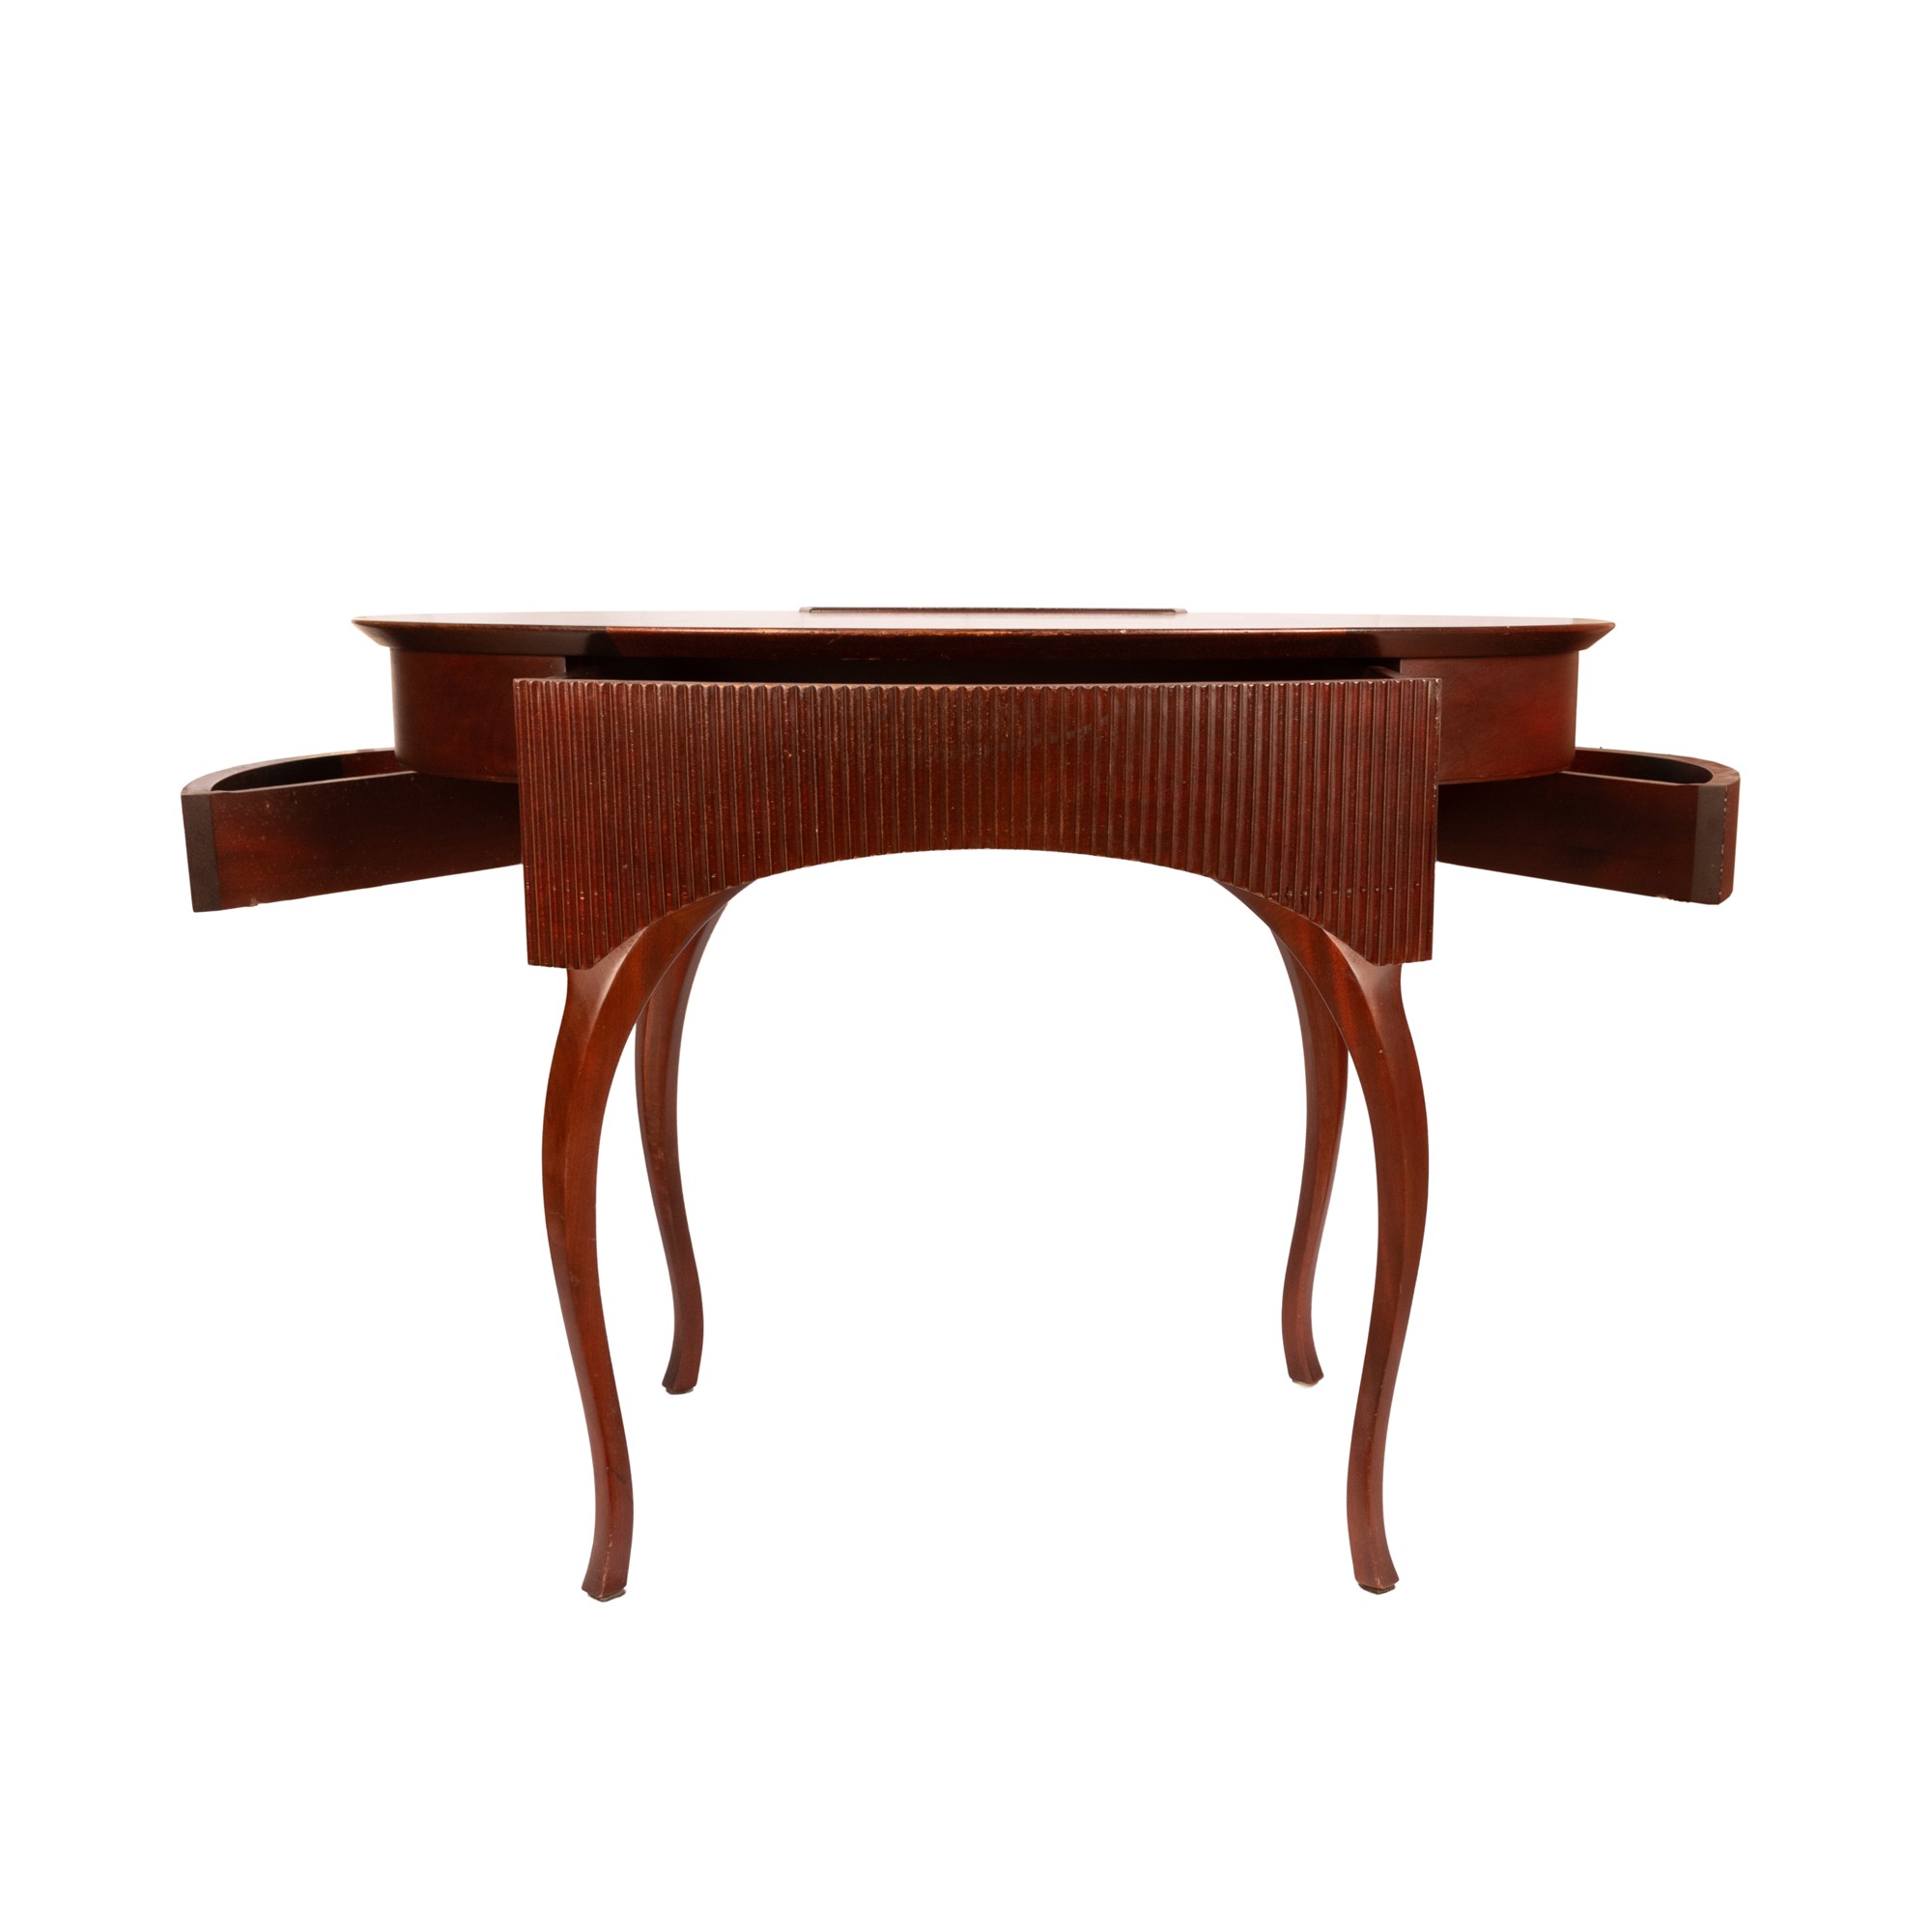 Writing desk in cherry wood - Image 9 of 25